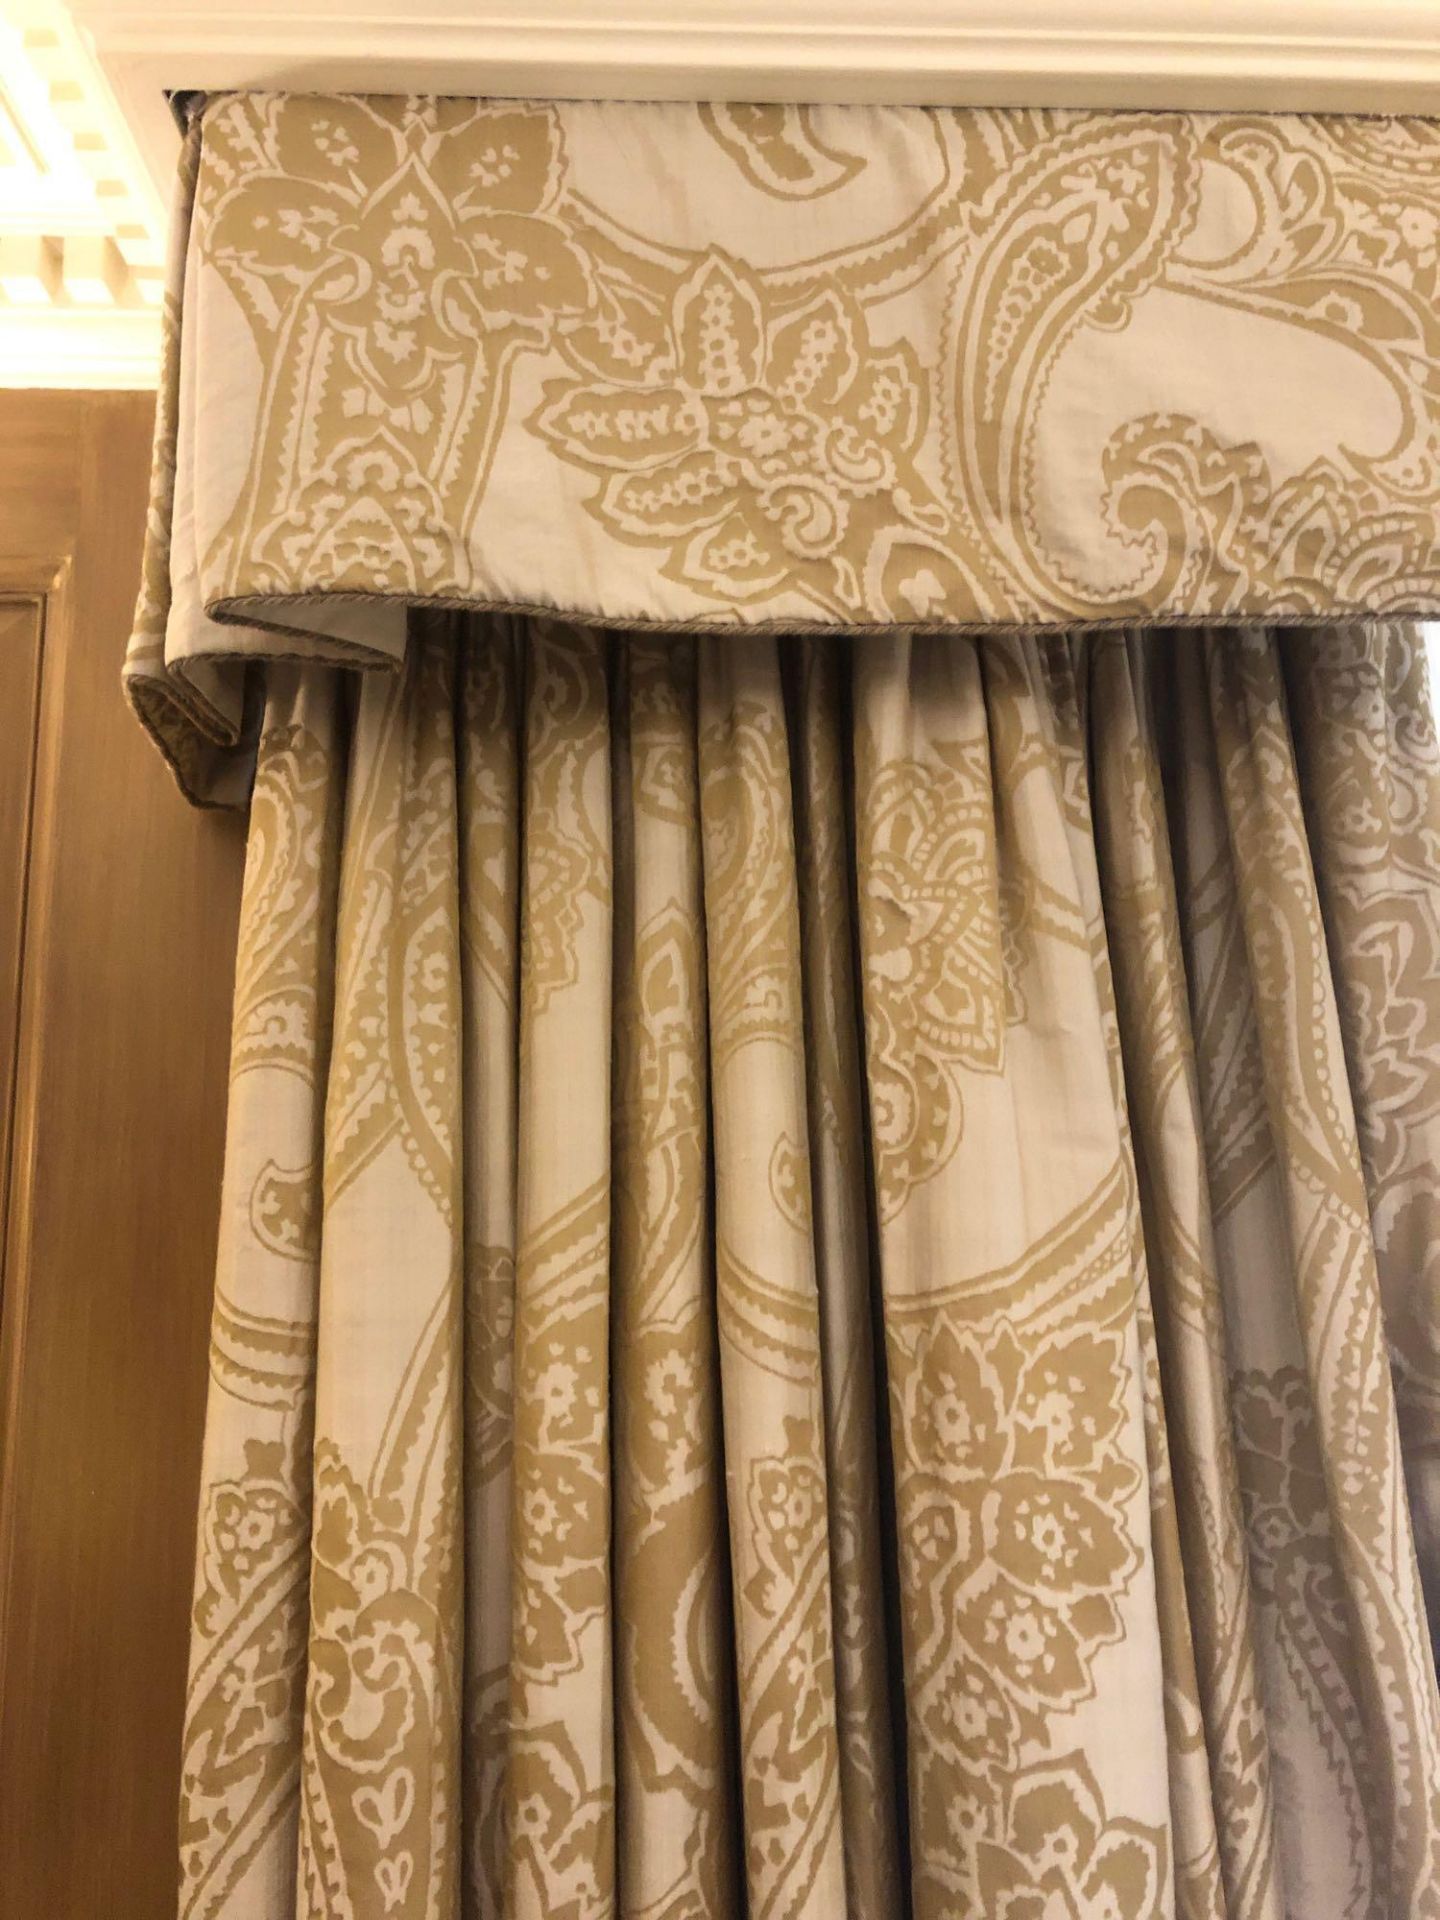 A Pair Of Luxury Drapes And Pelmet Gold And Champagne Pattern 250 x 260cm (Room 510) - Bild 2 aus 2